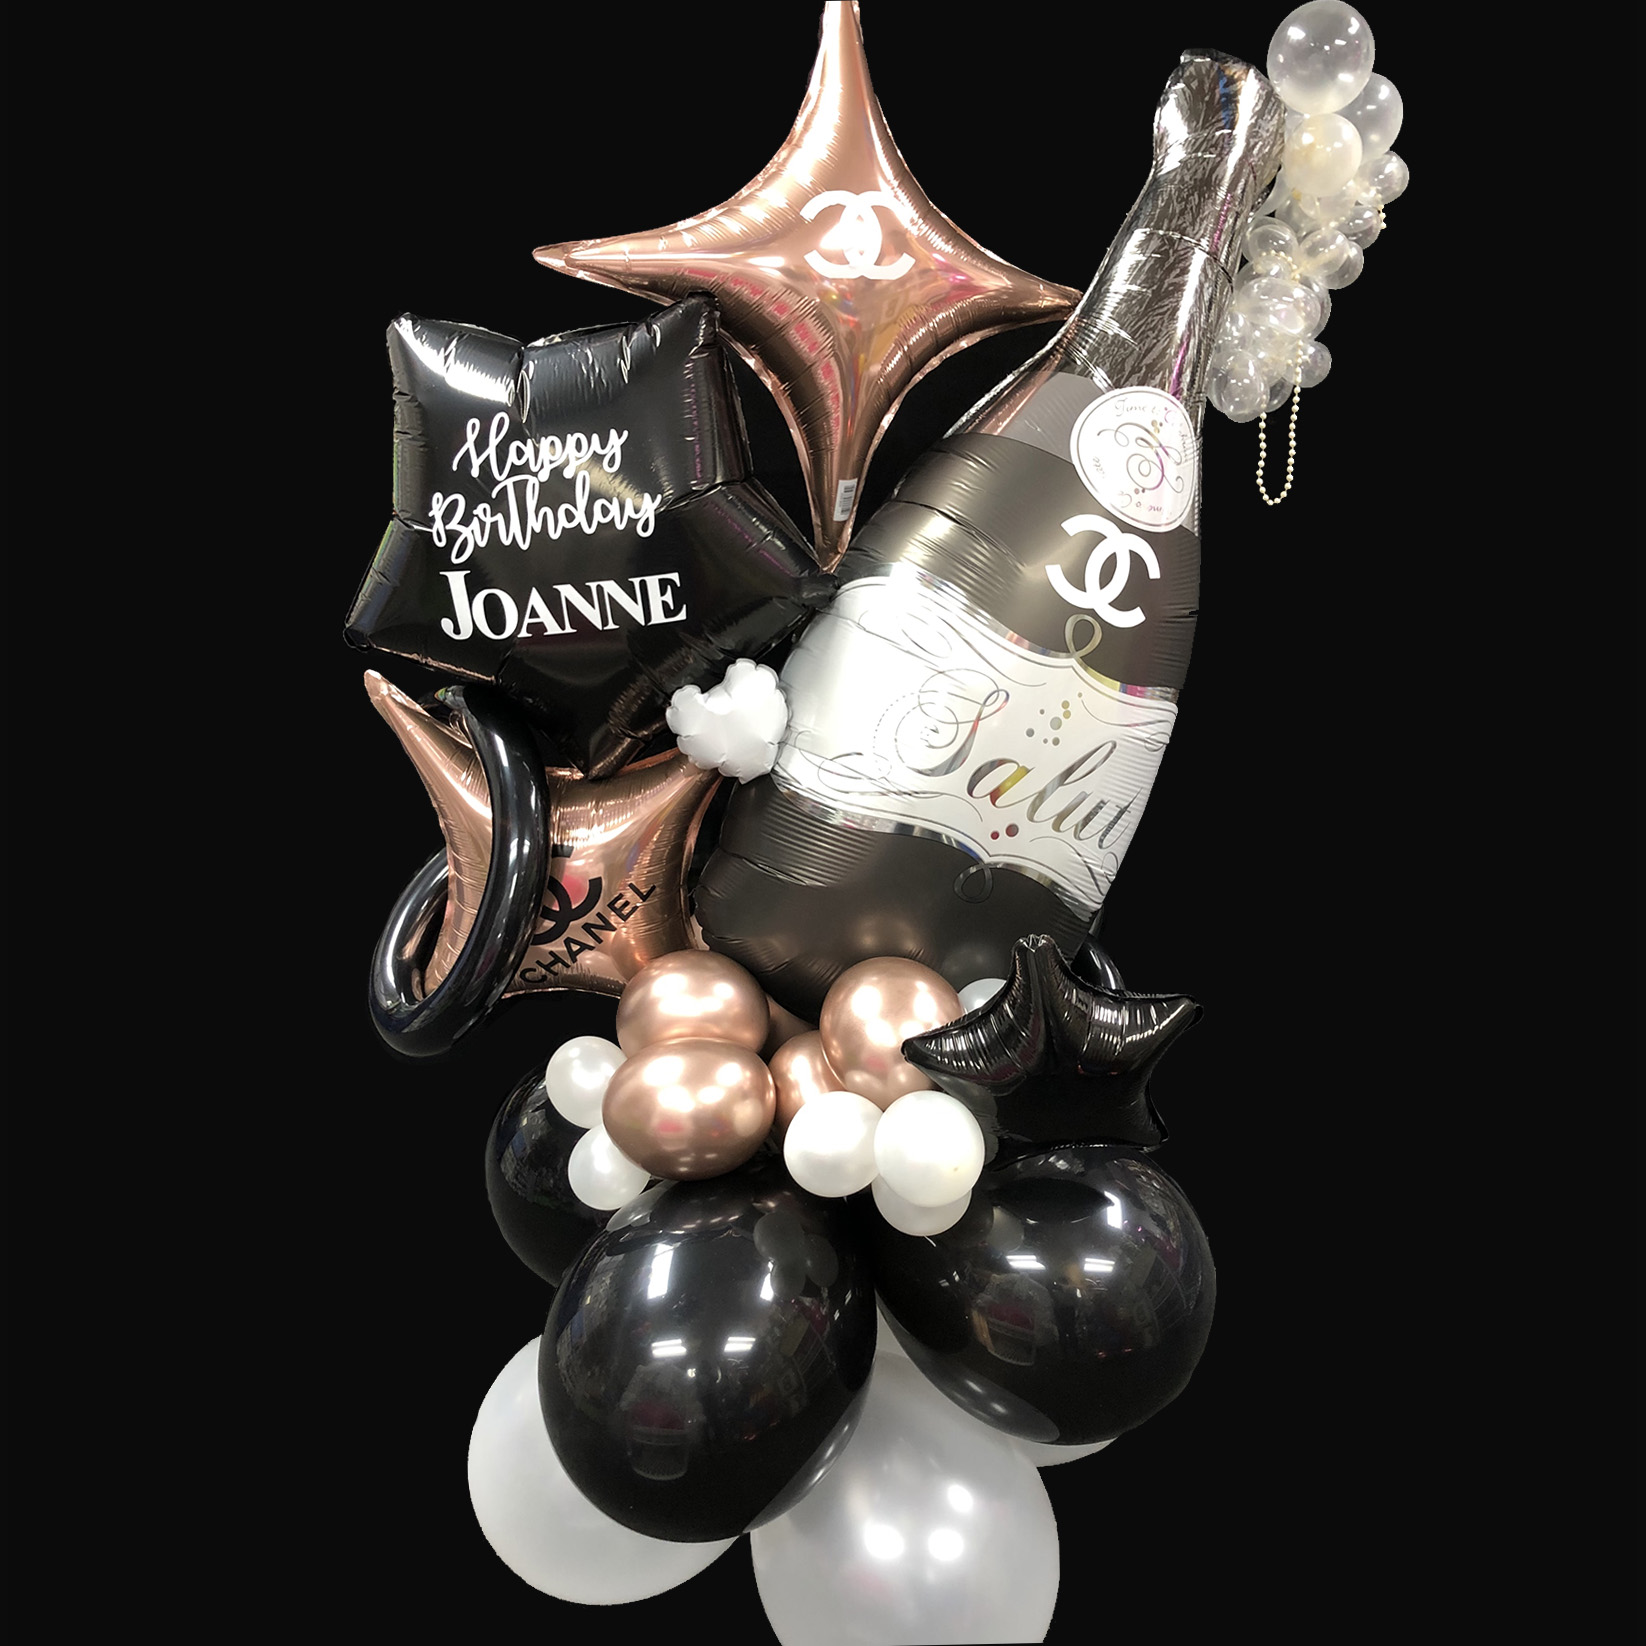 Chanel Birthday Balloon Bouquet - The Brat Shack Party Store